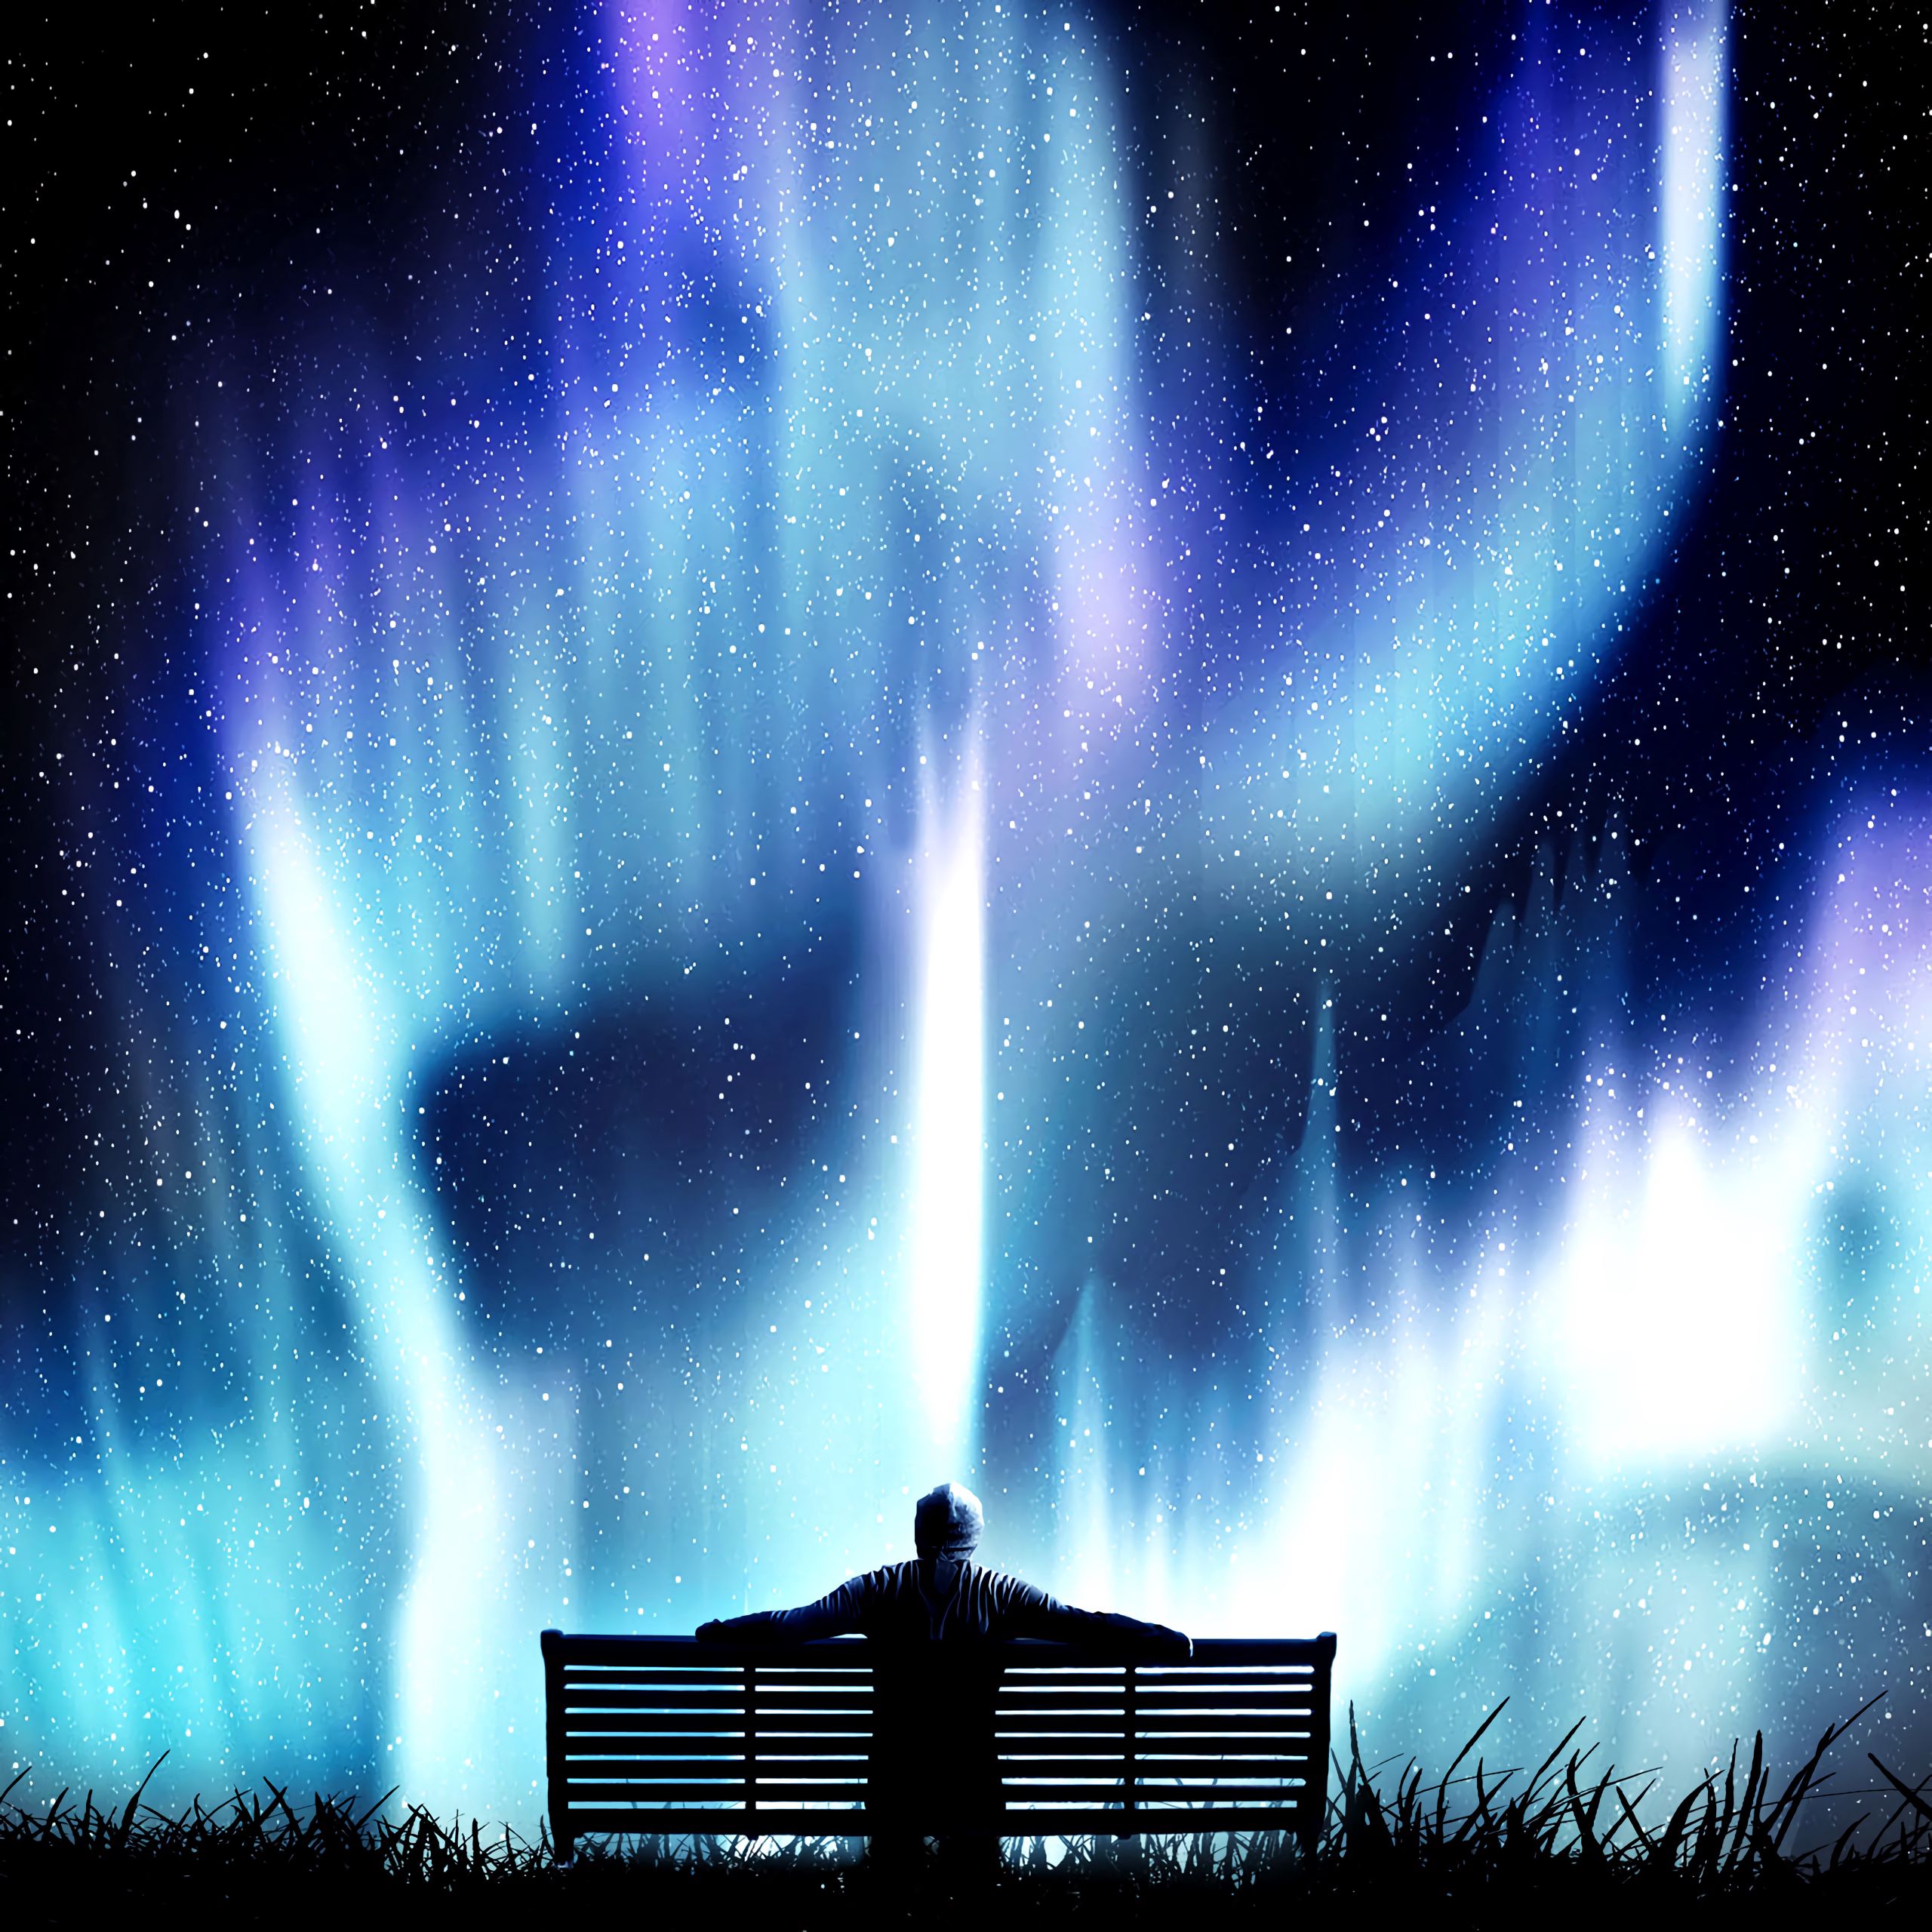 photoshop, bench, northern lights, nature collection of HD images